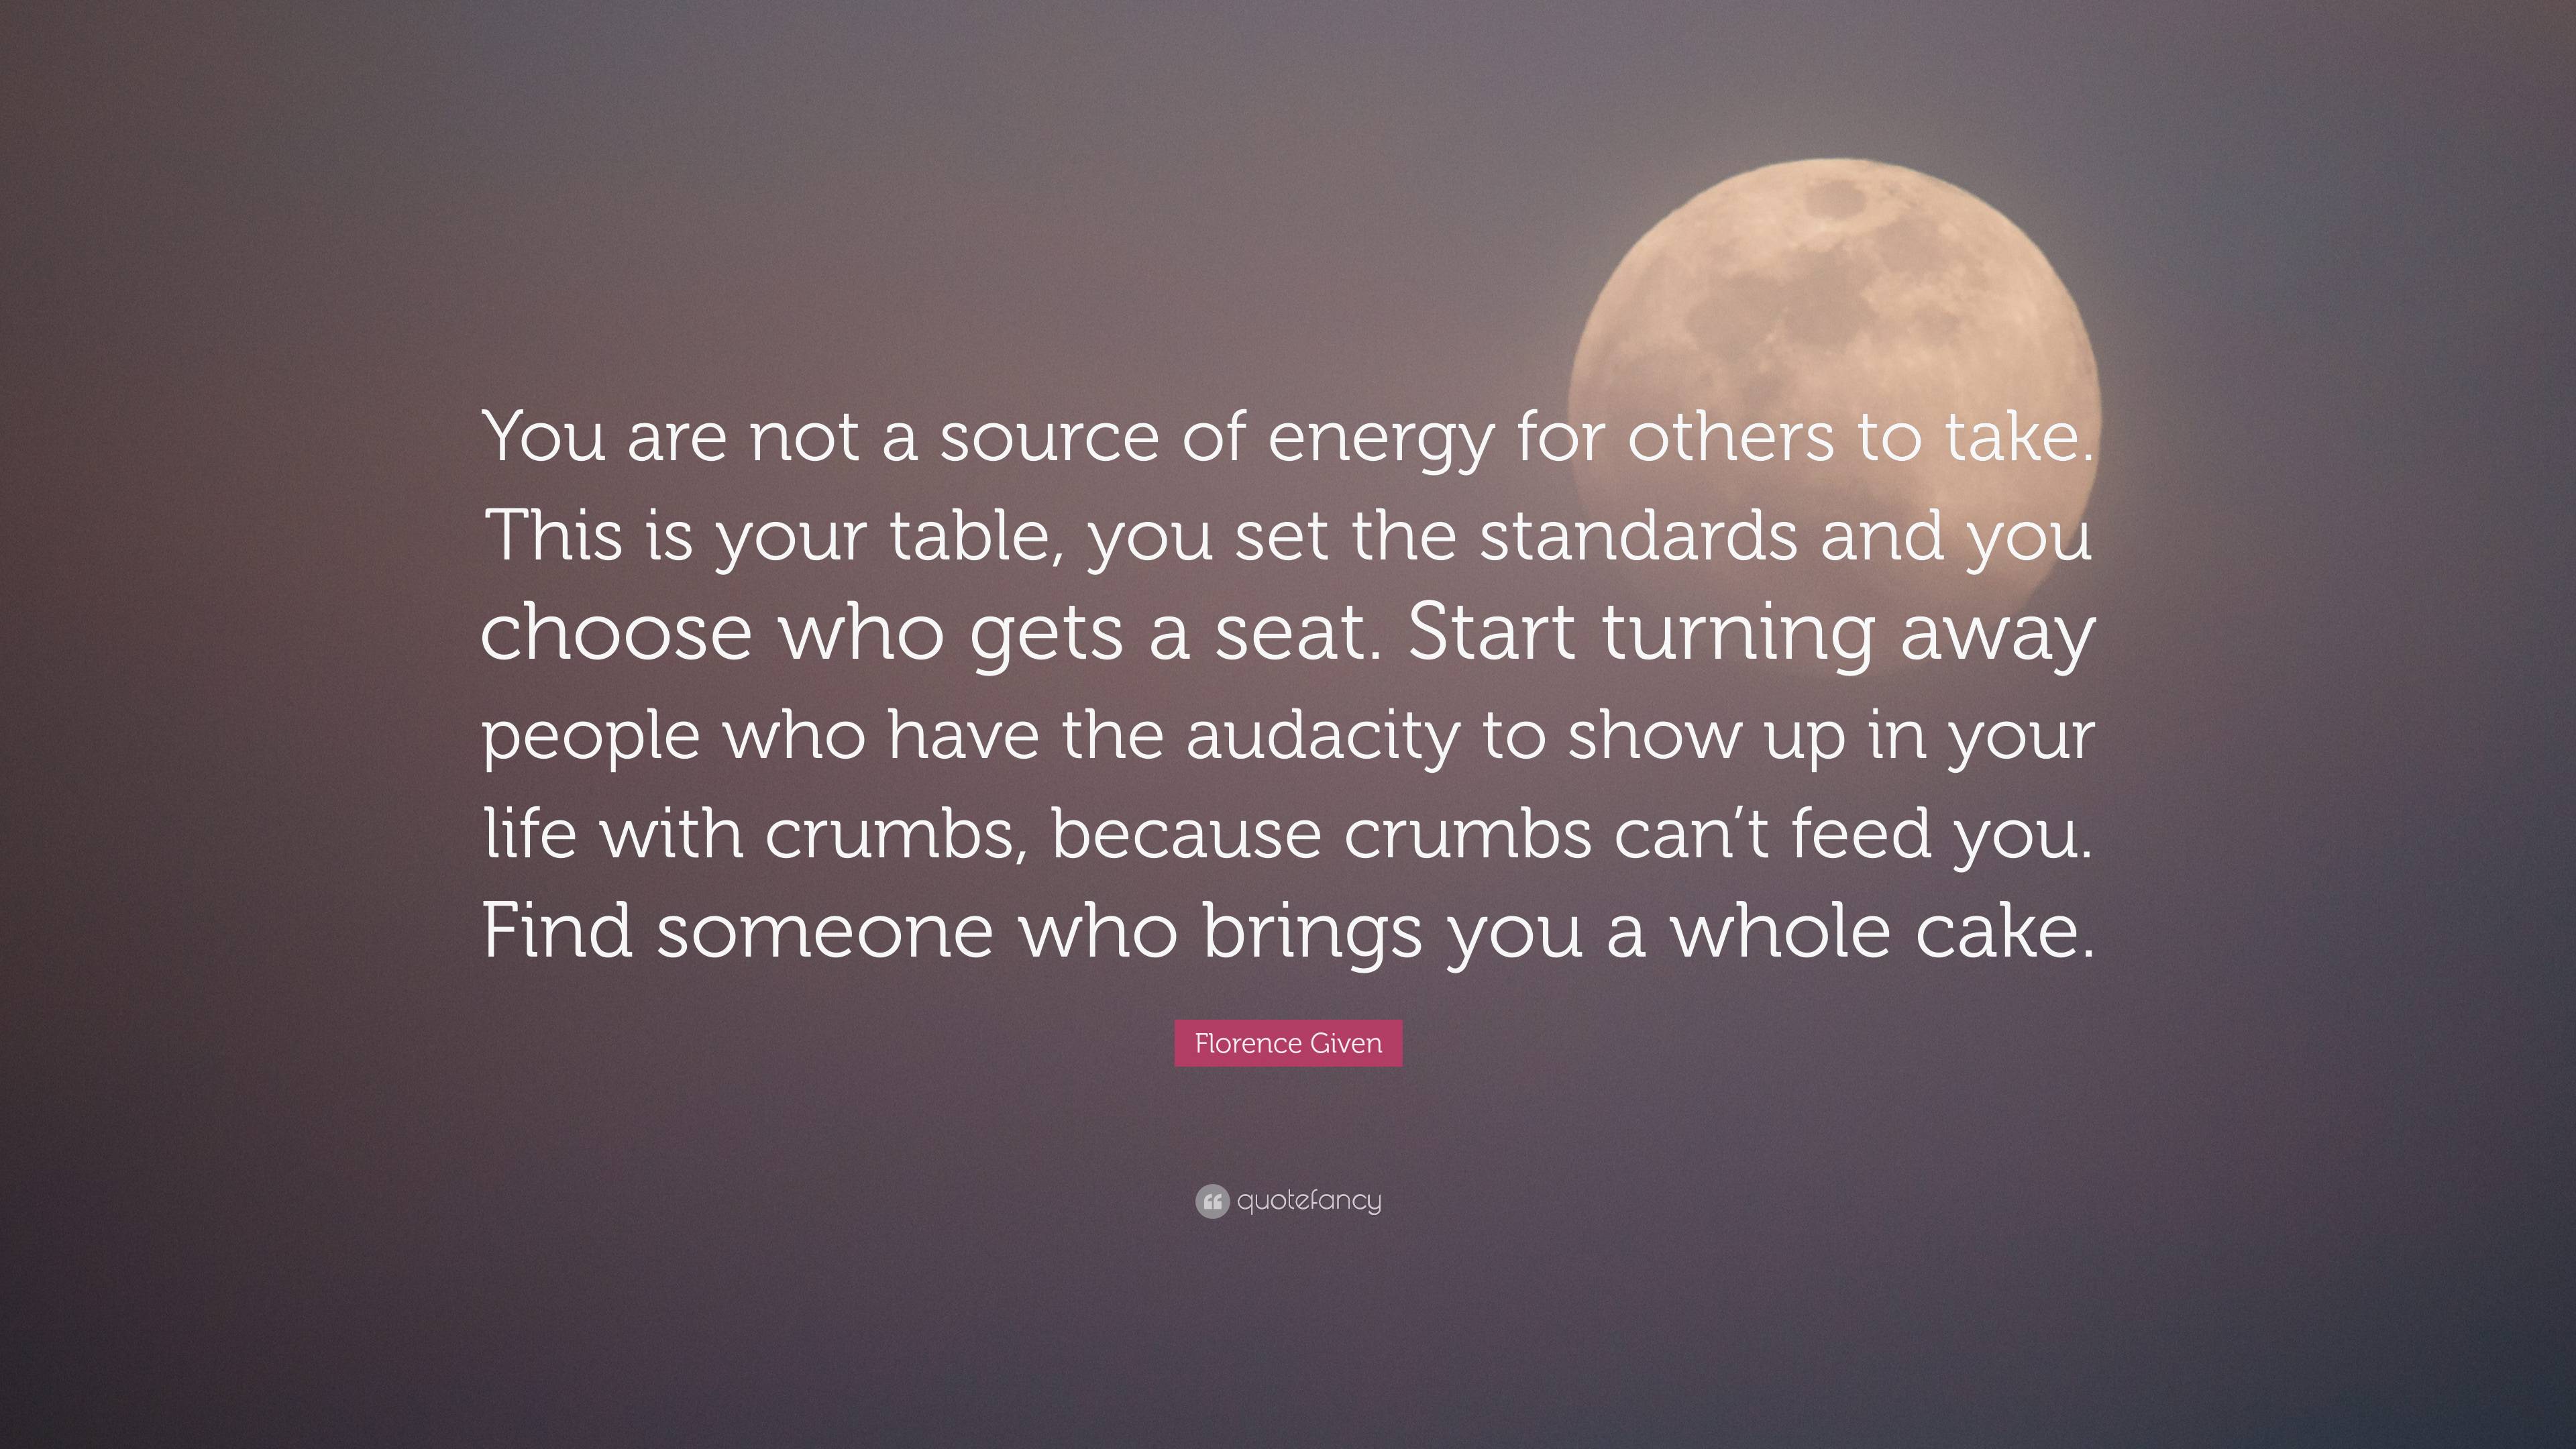 Florence Given Quote: “You are not a source of energy for others to ...